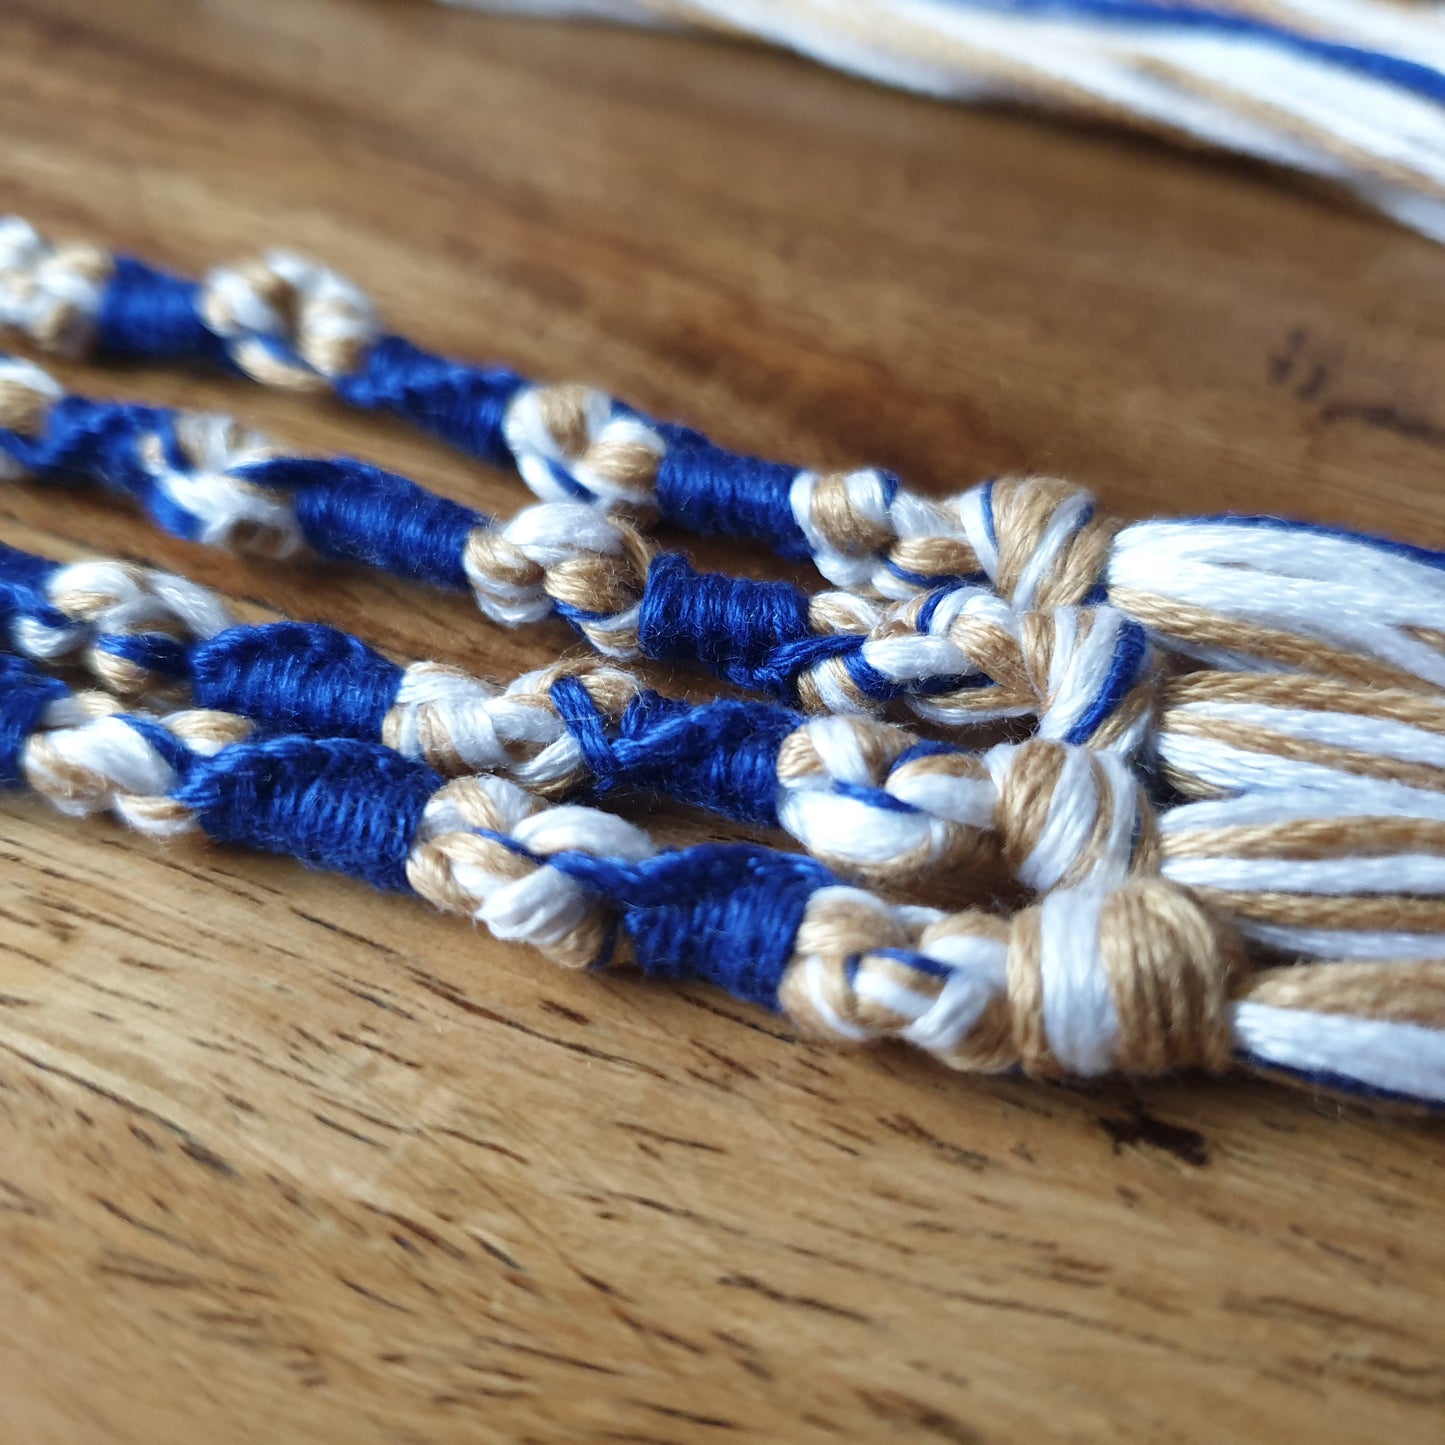 Tzitzit set of 4 - Gold, White & Blue, Knotted YHWH (10-5-6-5), Traditional Tassels, Torah Fringe | FREE DELIVERY